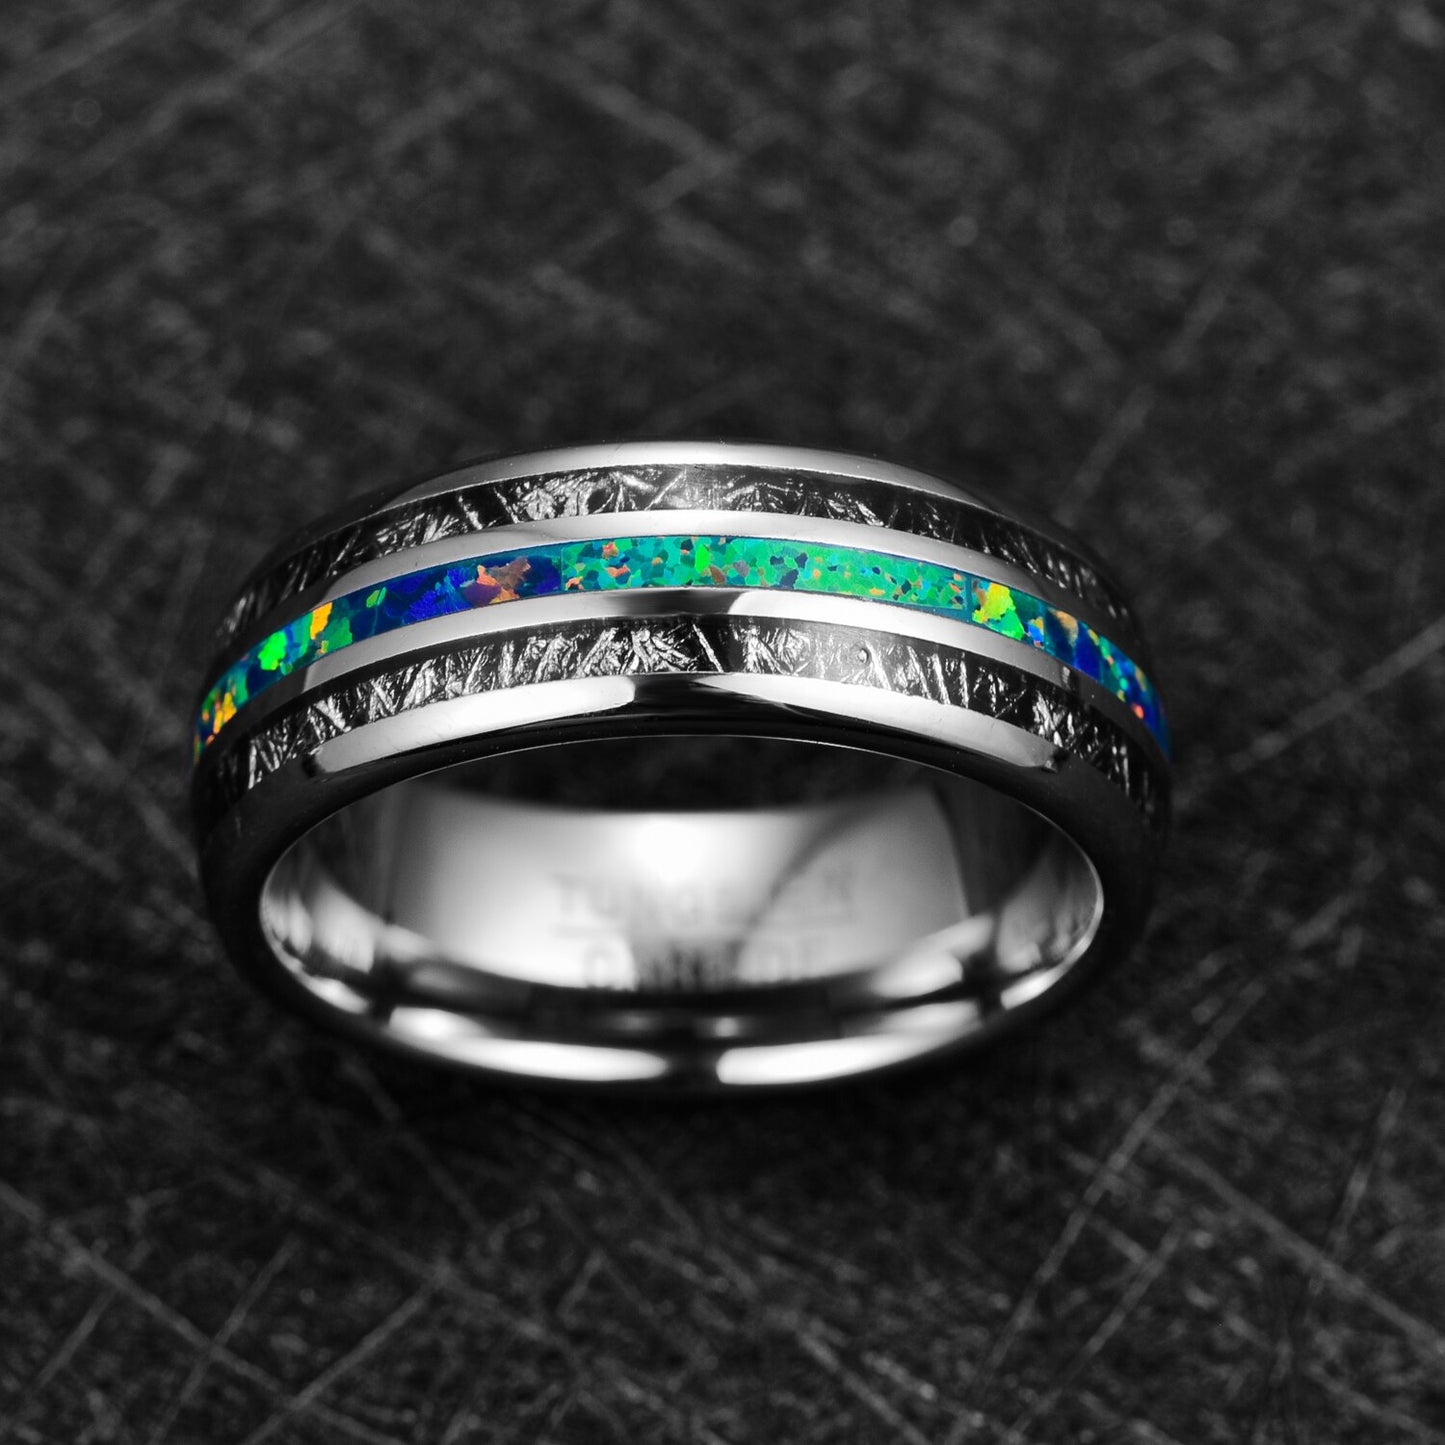 Ginnungagap Fire and Ice 8mm Tungsten Carbide Ring with Black meteorite and Green Opal Stone